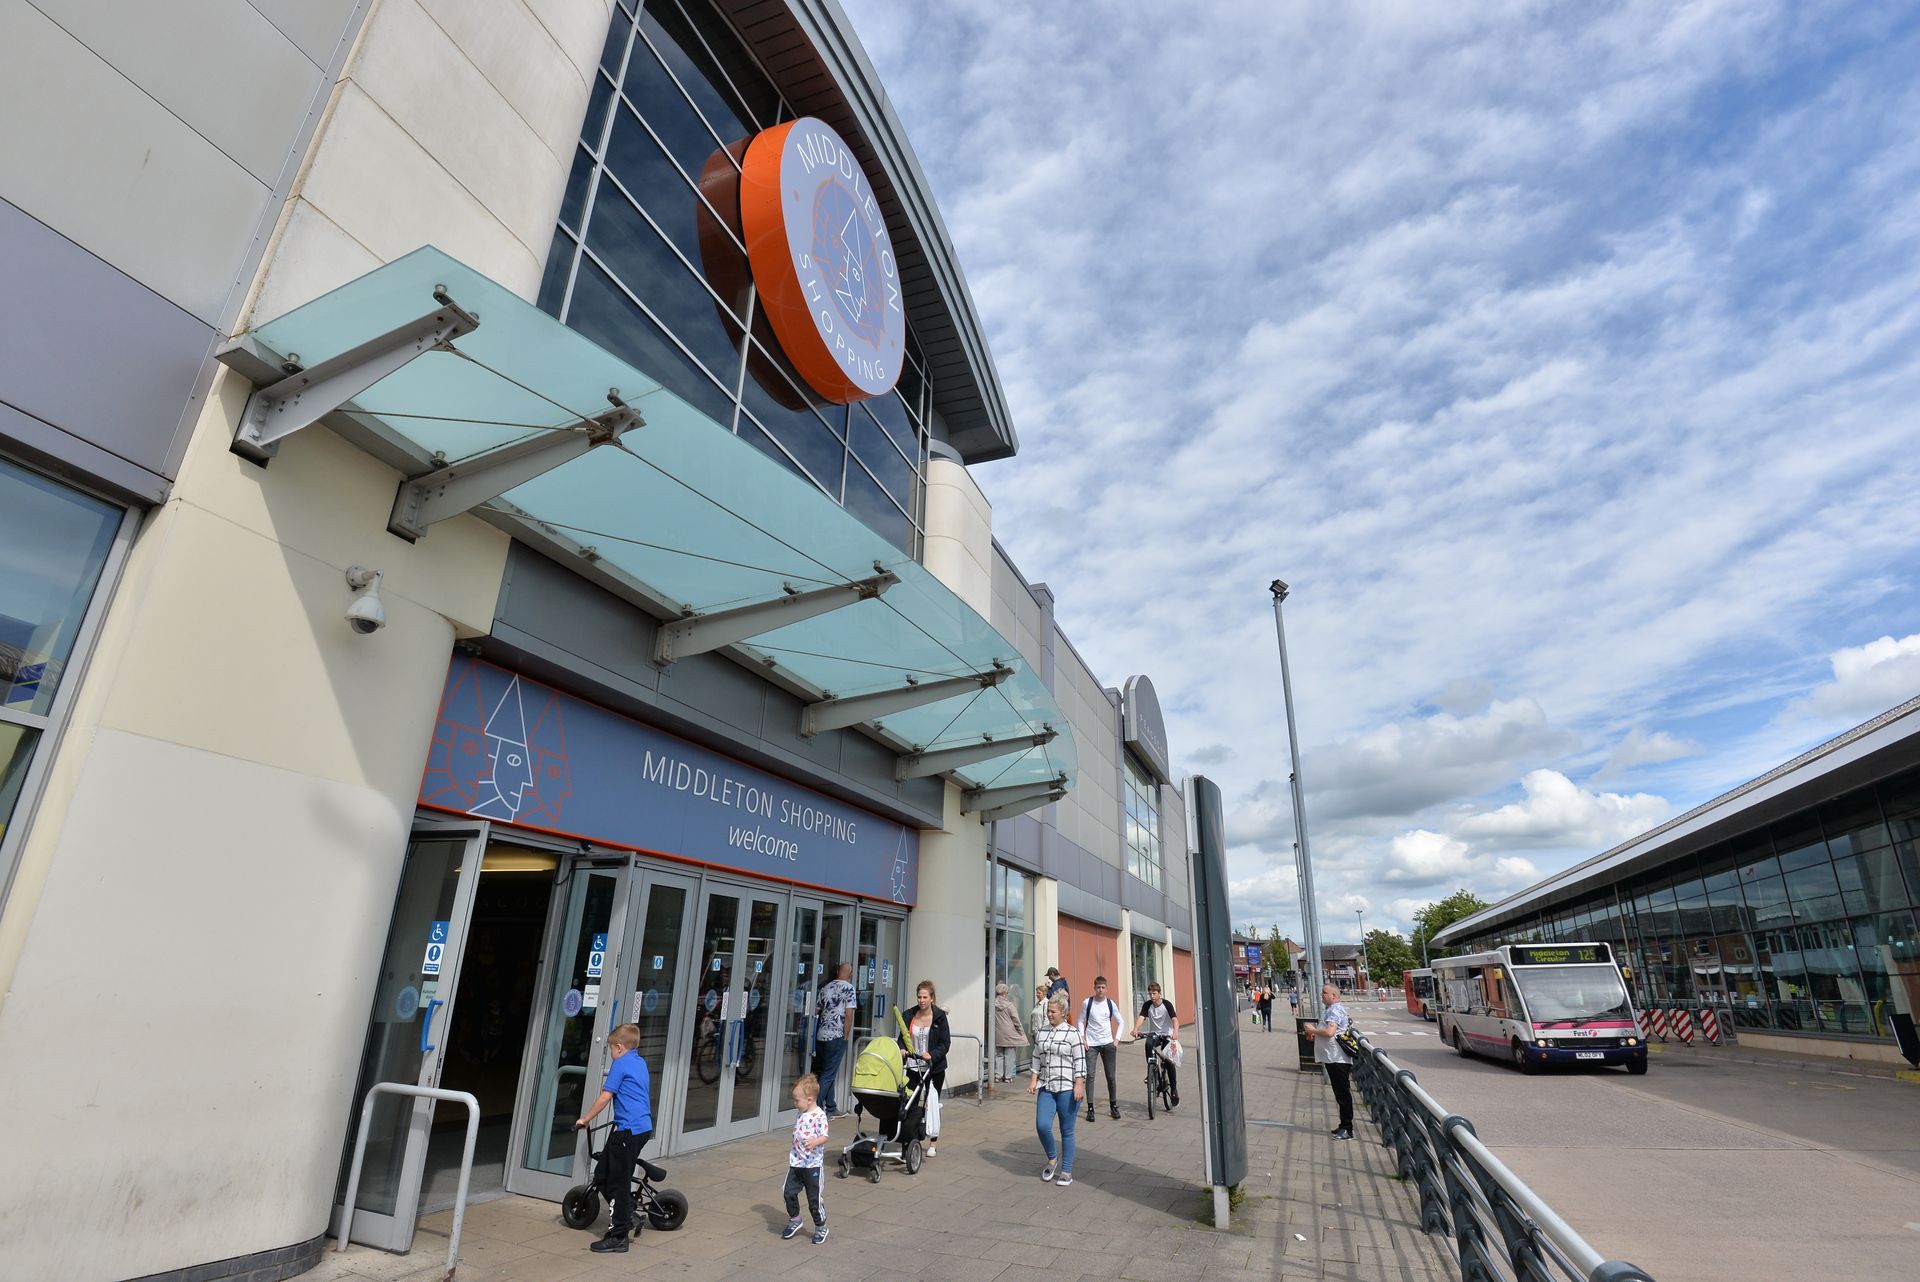 Middleton Shopping Centre; A community hub for support and growth